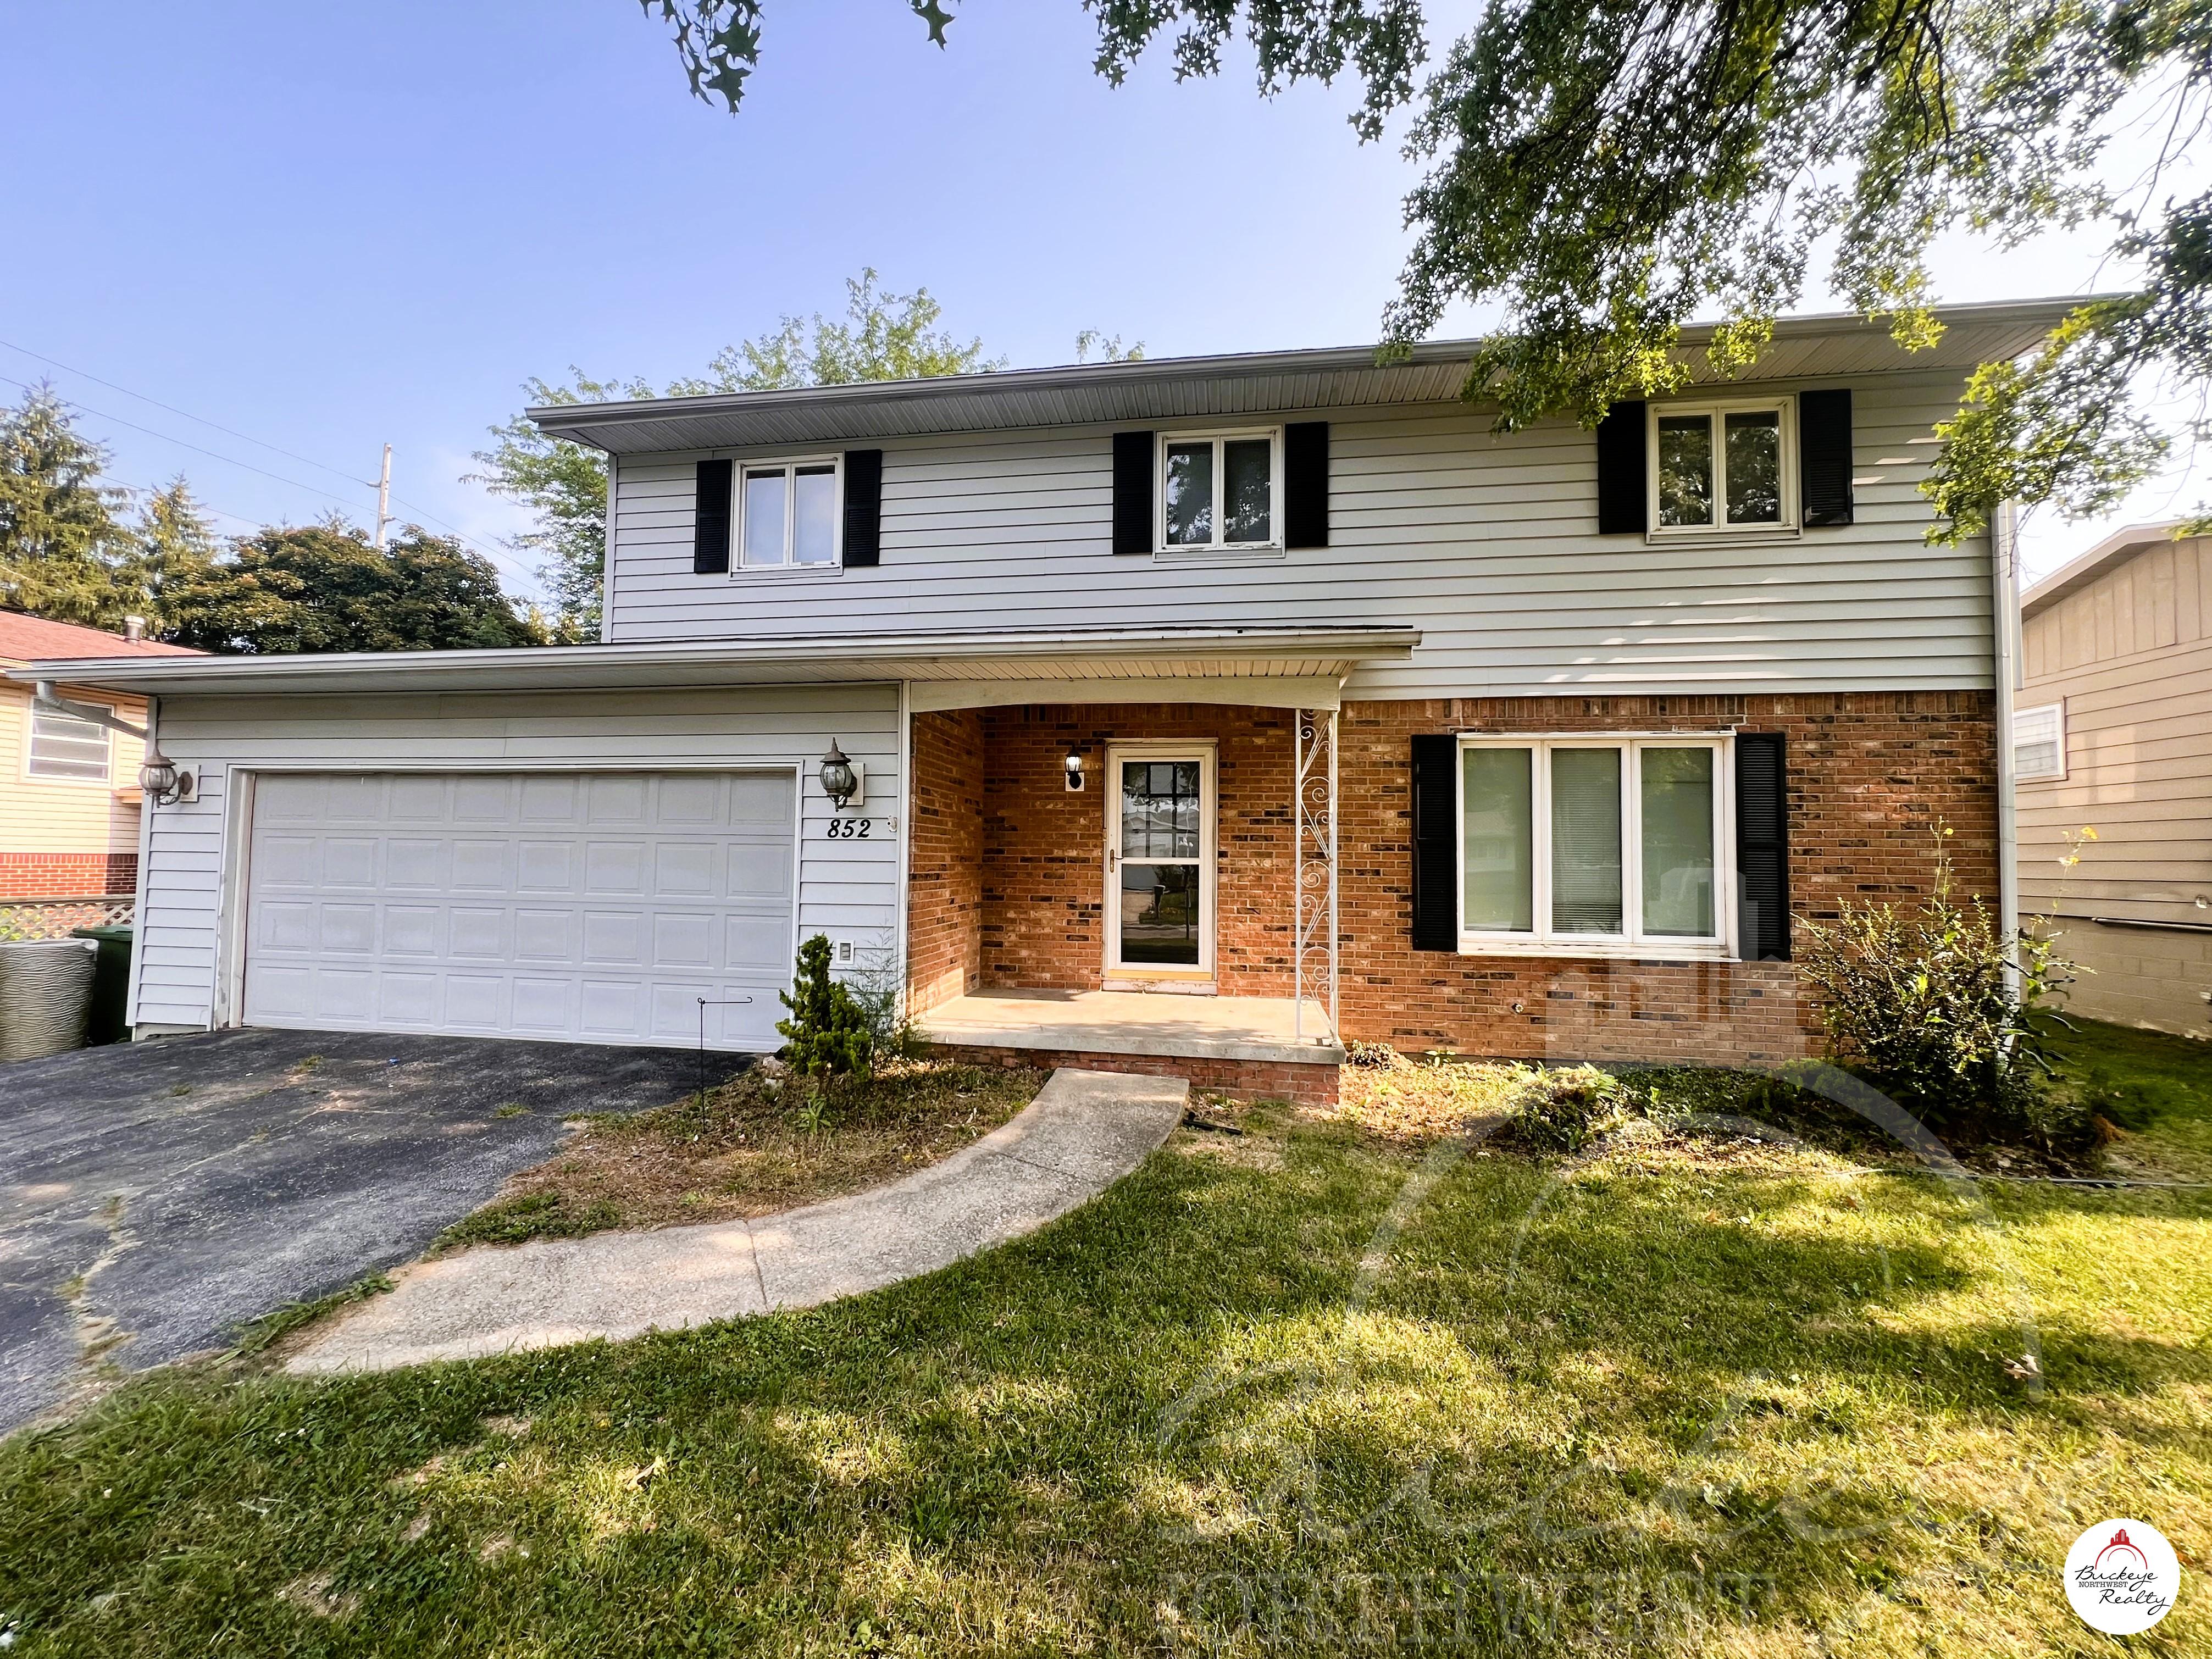 852 Standish Dr  Bowling Green, OH